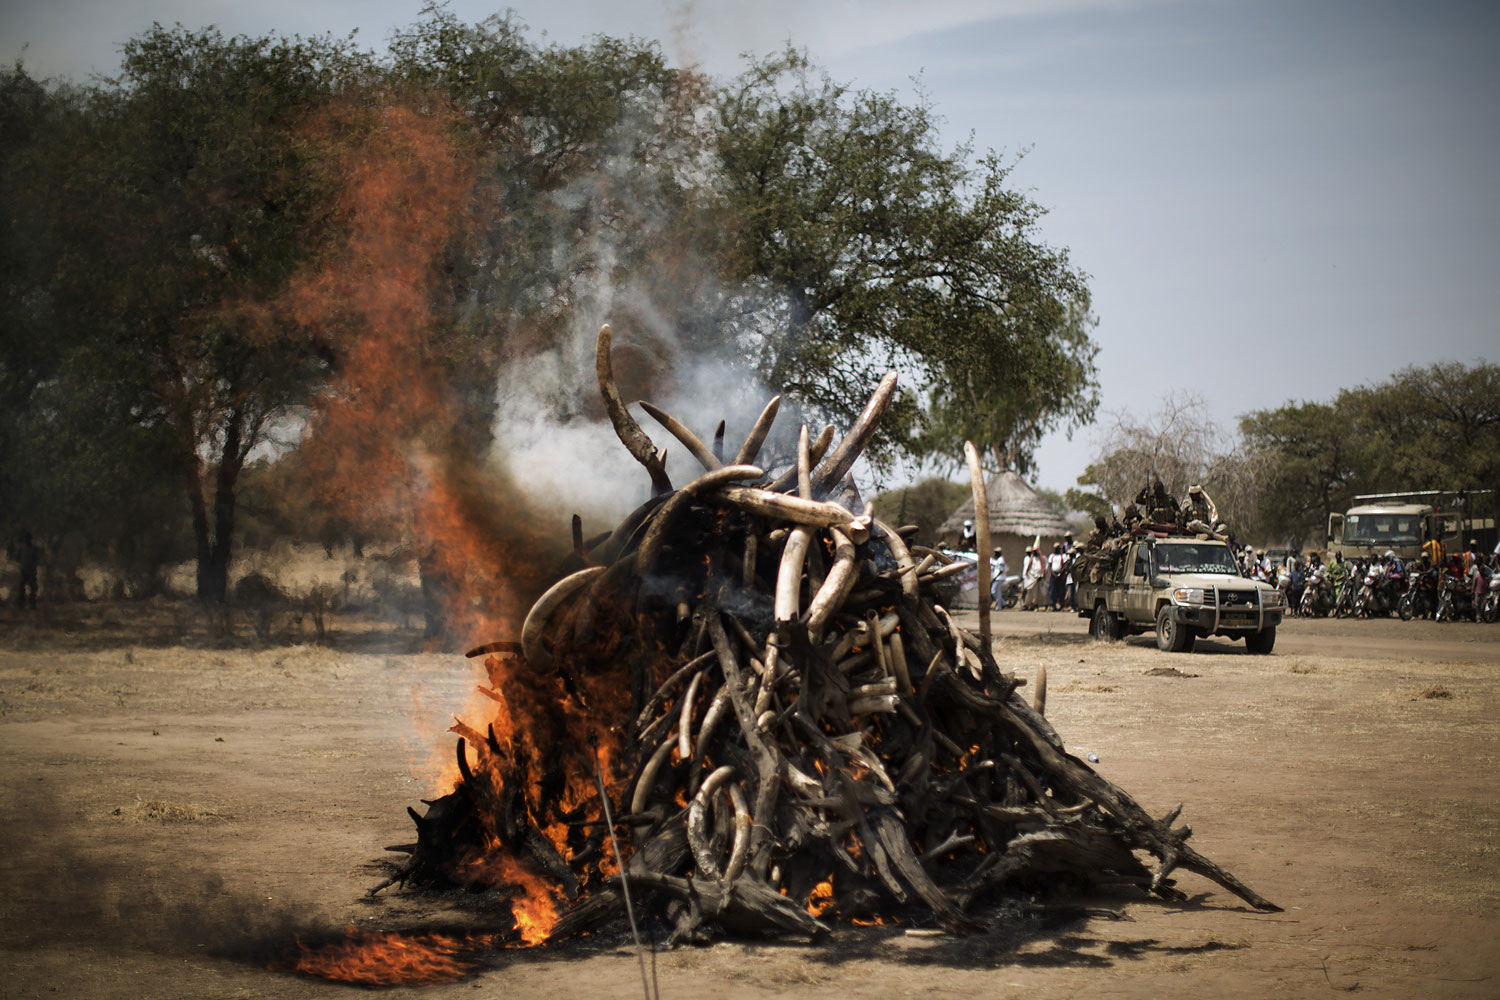 A pyre on which over a thousand kilos of elephant tusks will be incinerated burns during a ceremony marking the 50th anniversary of the Zakouma National Park, Chad's oldest natural park, in Goz Djarat, on Feb. 21, 2014.